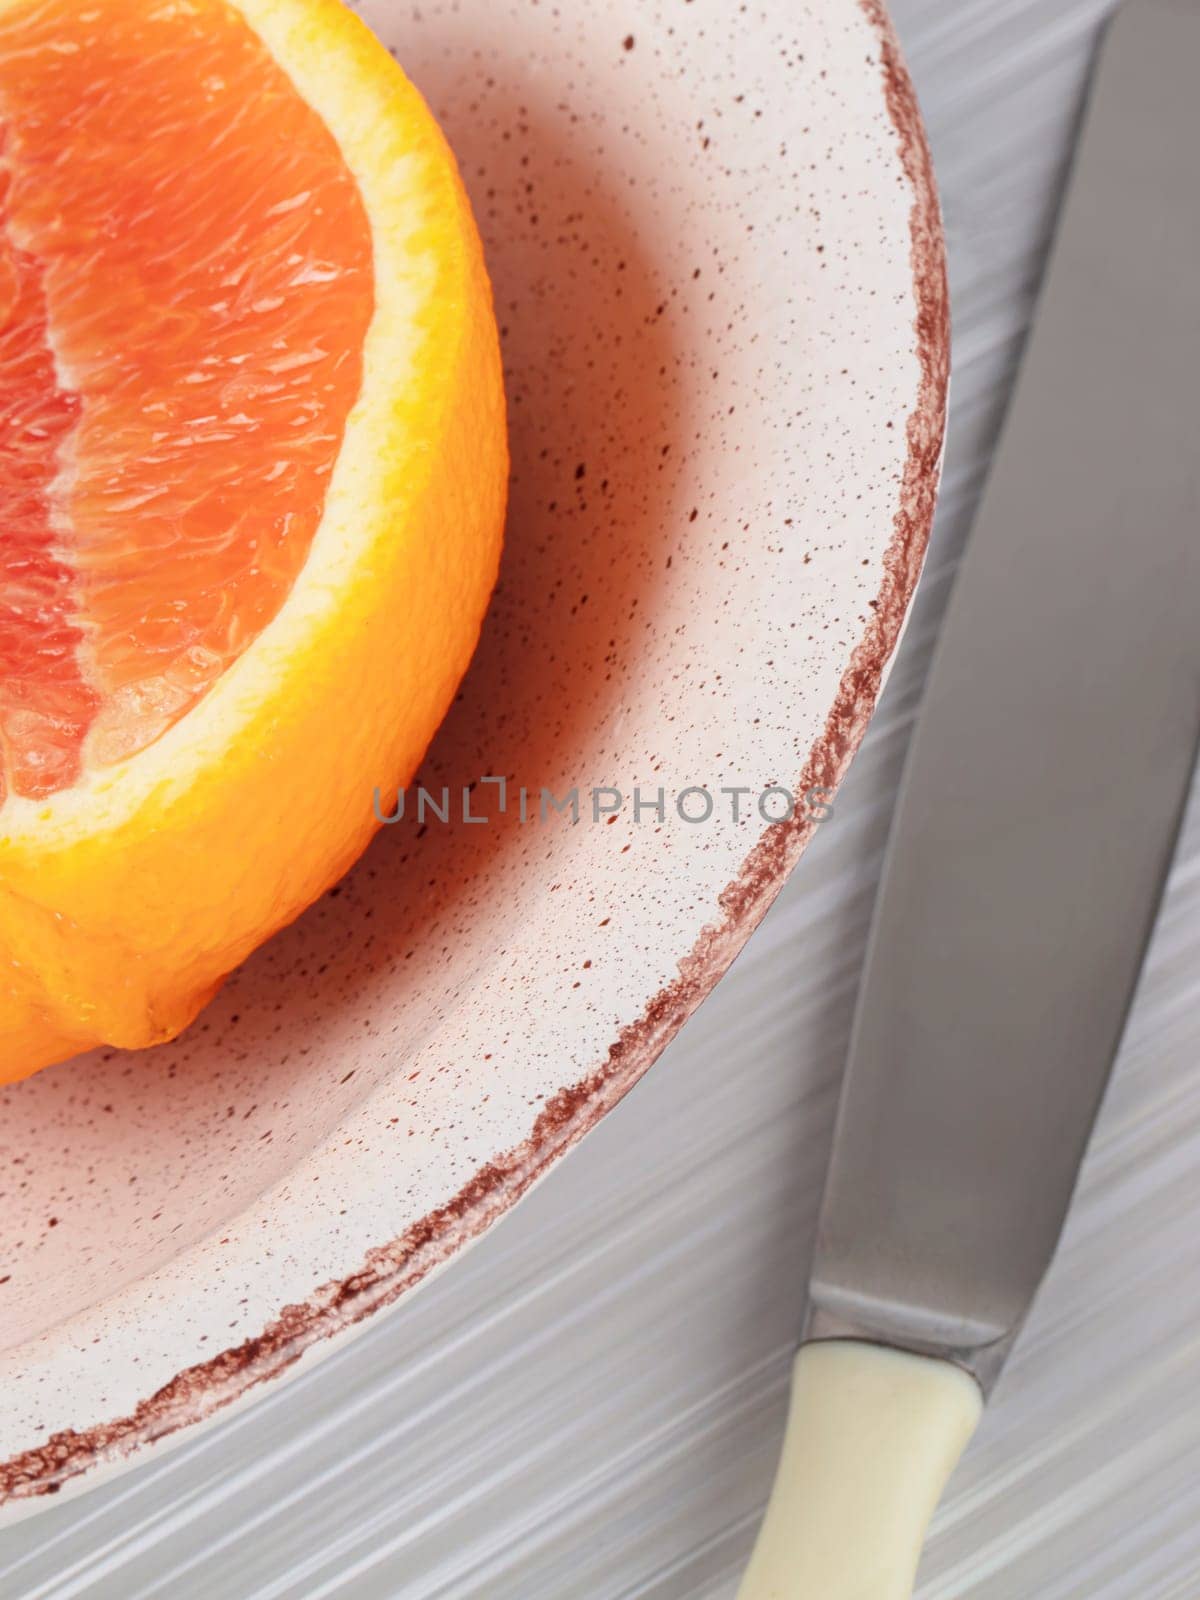 Part of a plate with half a grapefruit and a table knife. Photographed vertically.